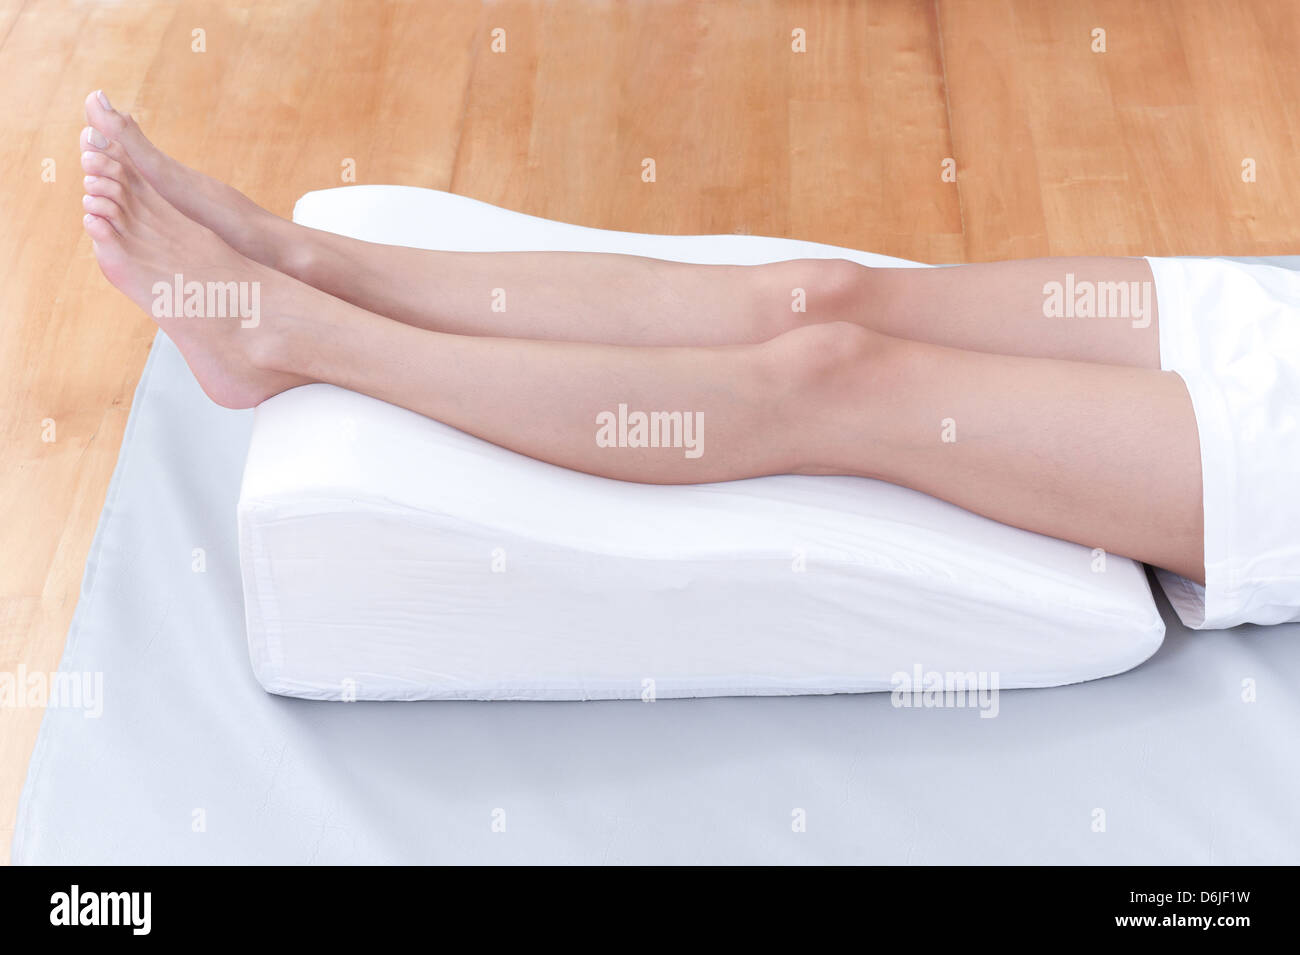 https://c8.alamy.com/comp/D6JF1W/a-womans-legs-lay-down-on-a-pillow-for-relaxing-and-preventing-varicose-D6JF1W.jpg